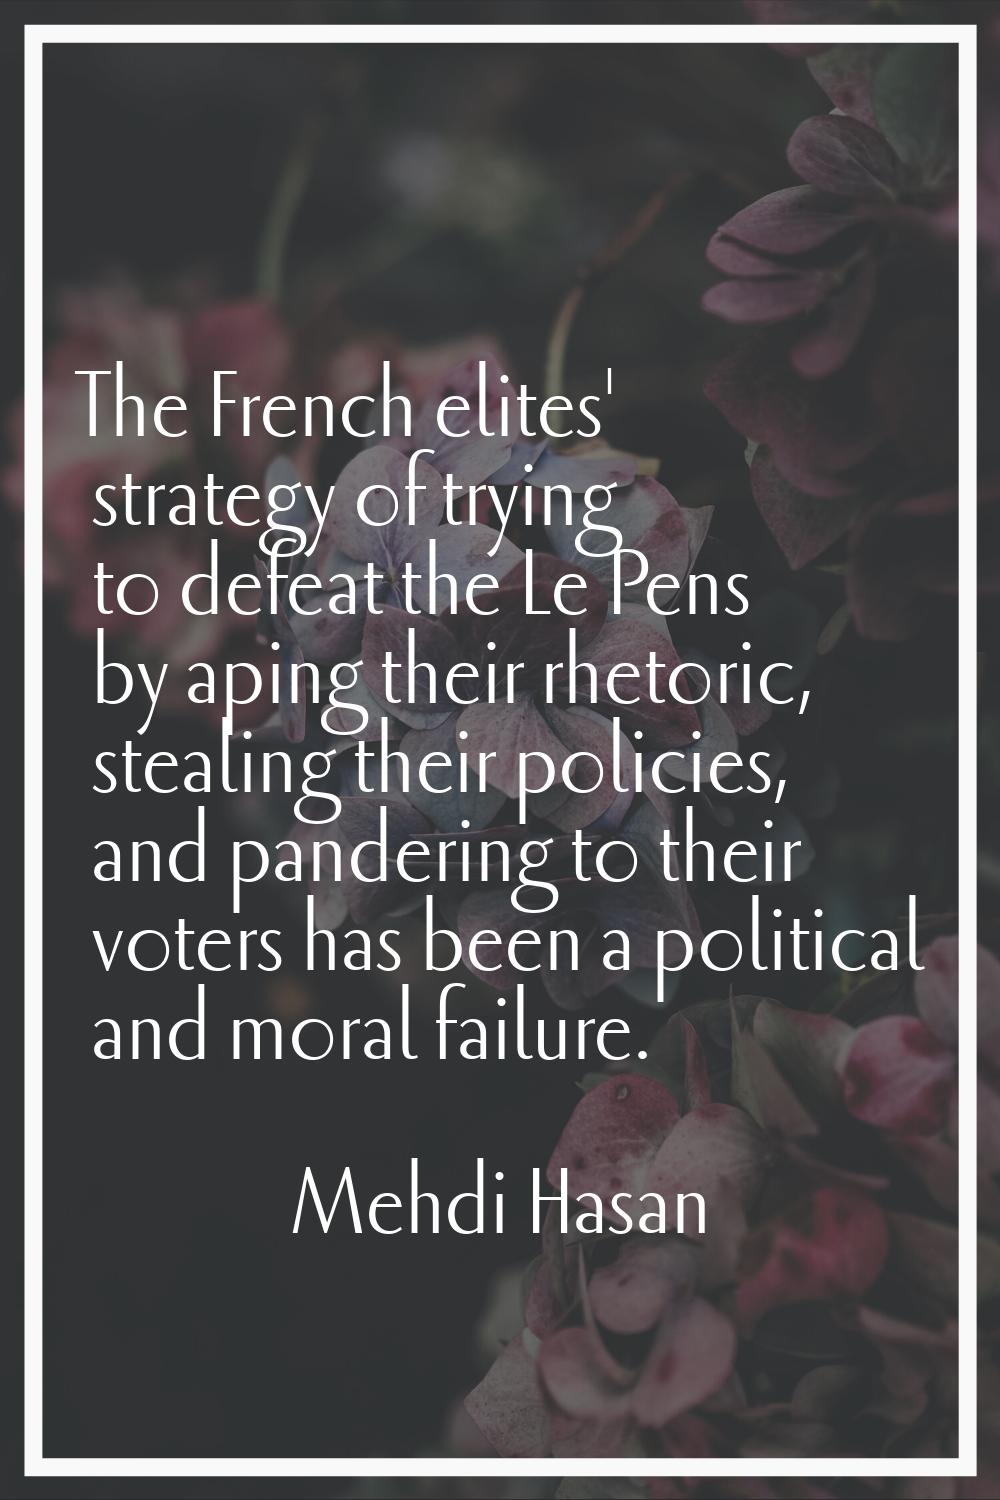 The French elites' strategy of trying to defeat the Le Pens by aping their rhetoric, stealing their